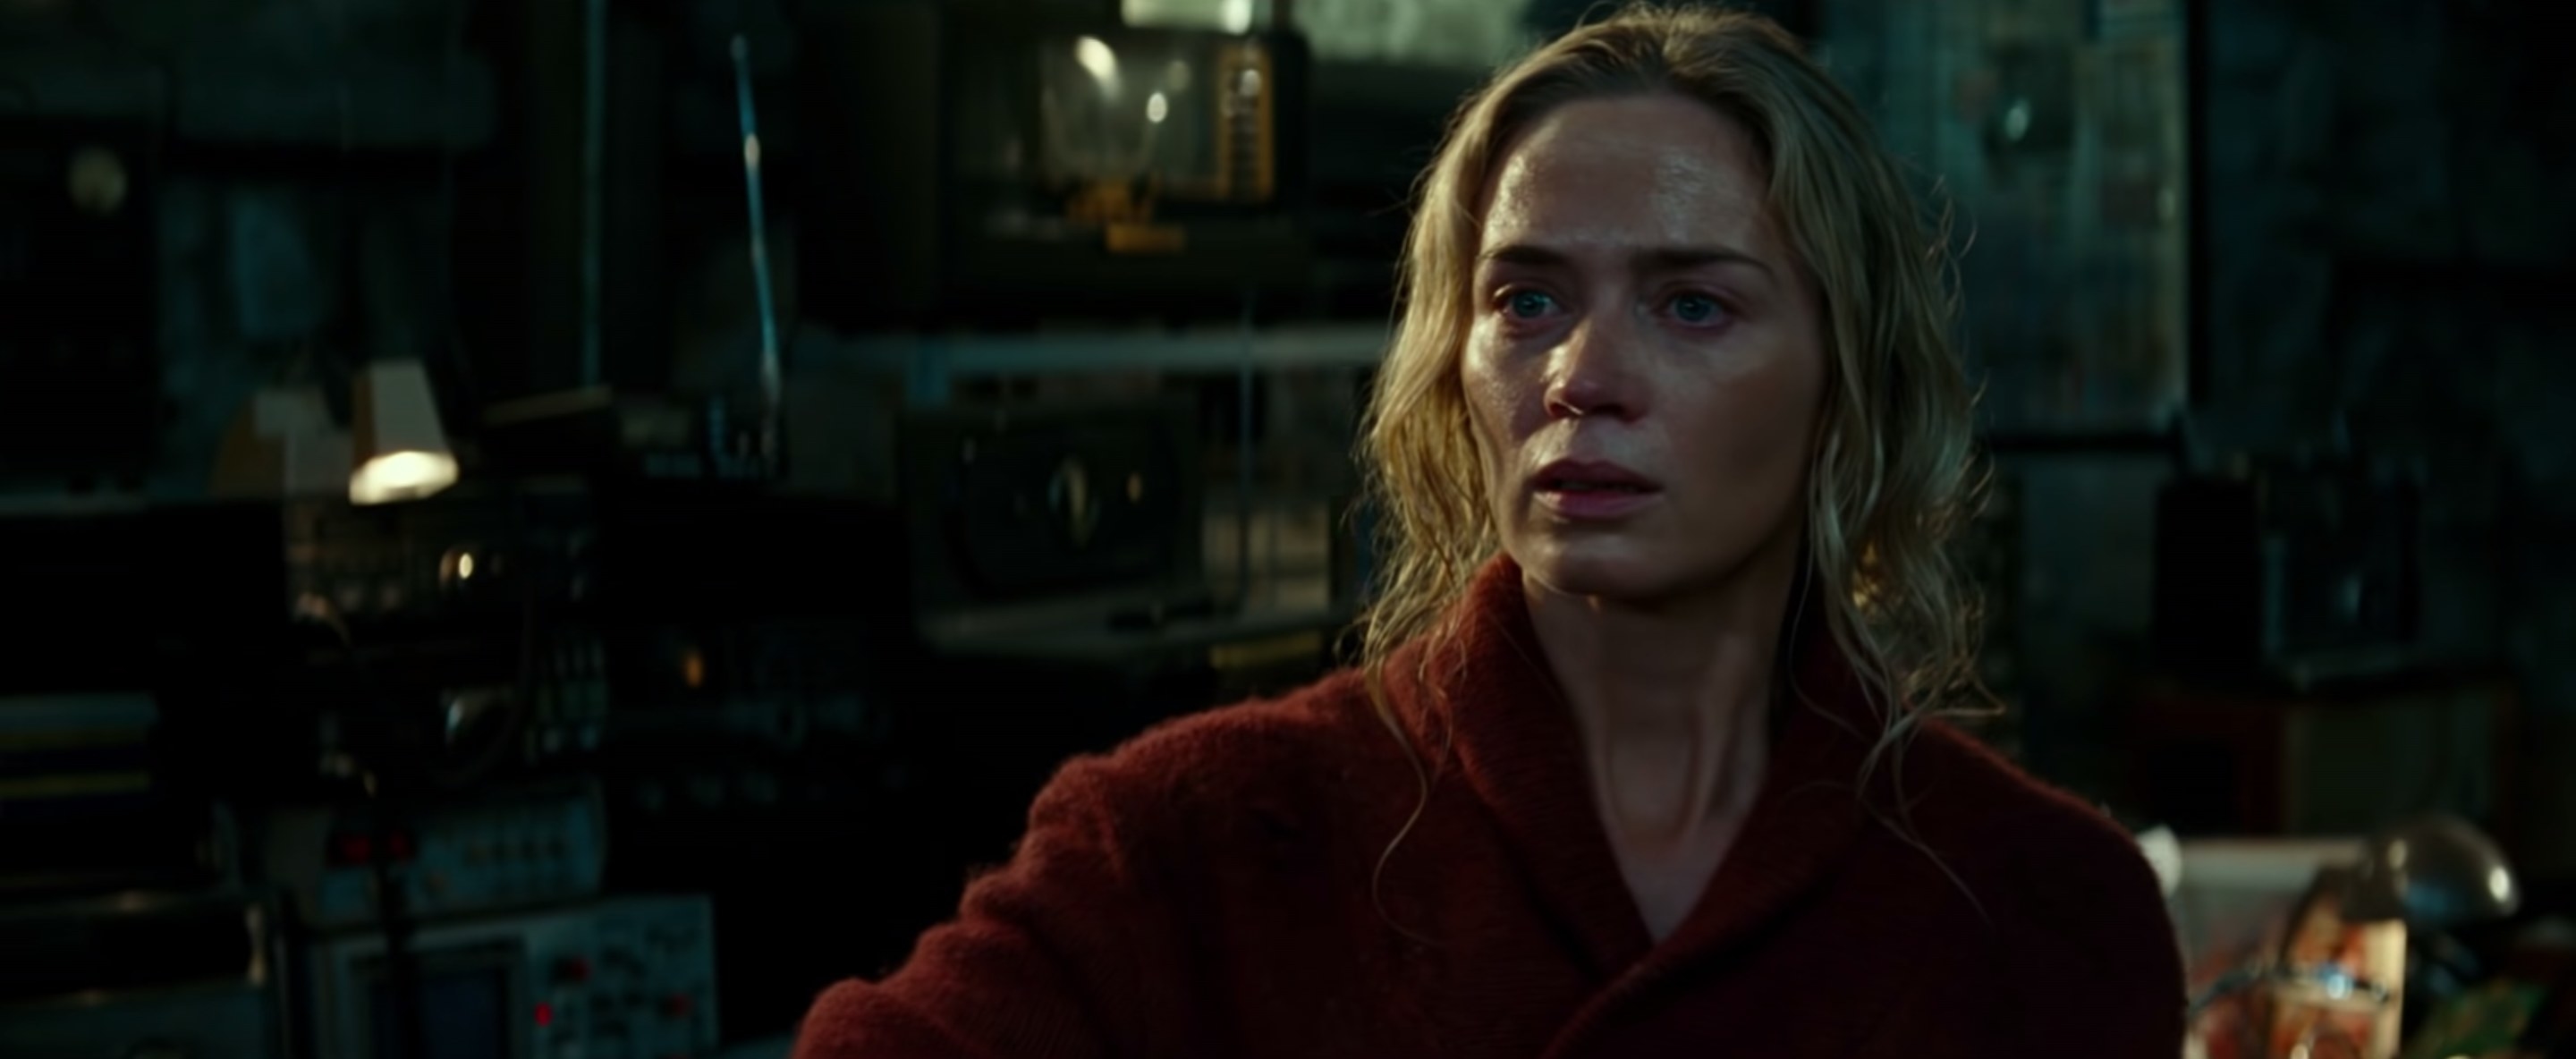 Emily Blunt starring in A Quiet Place